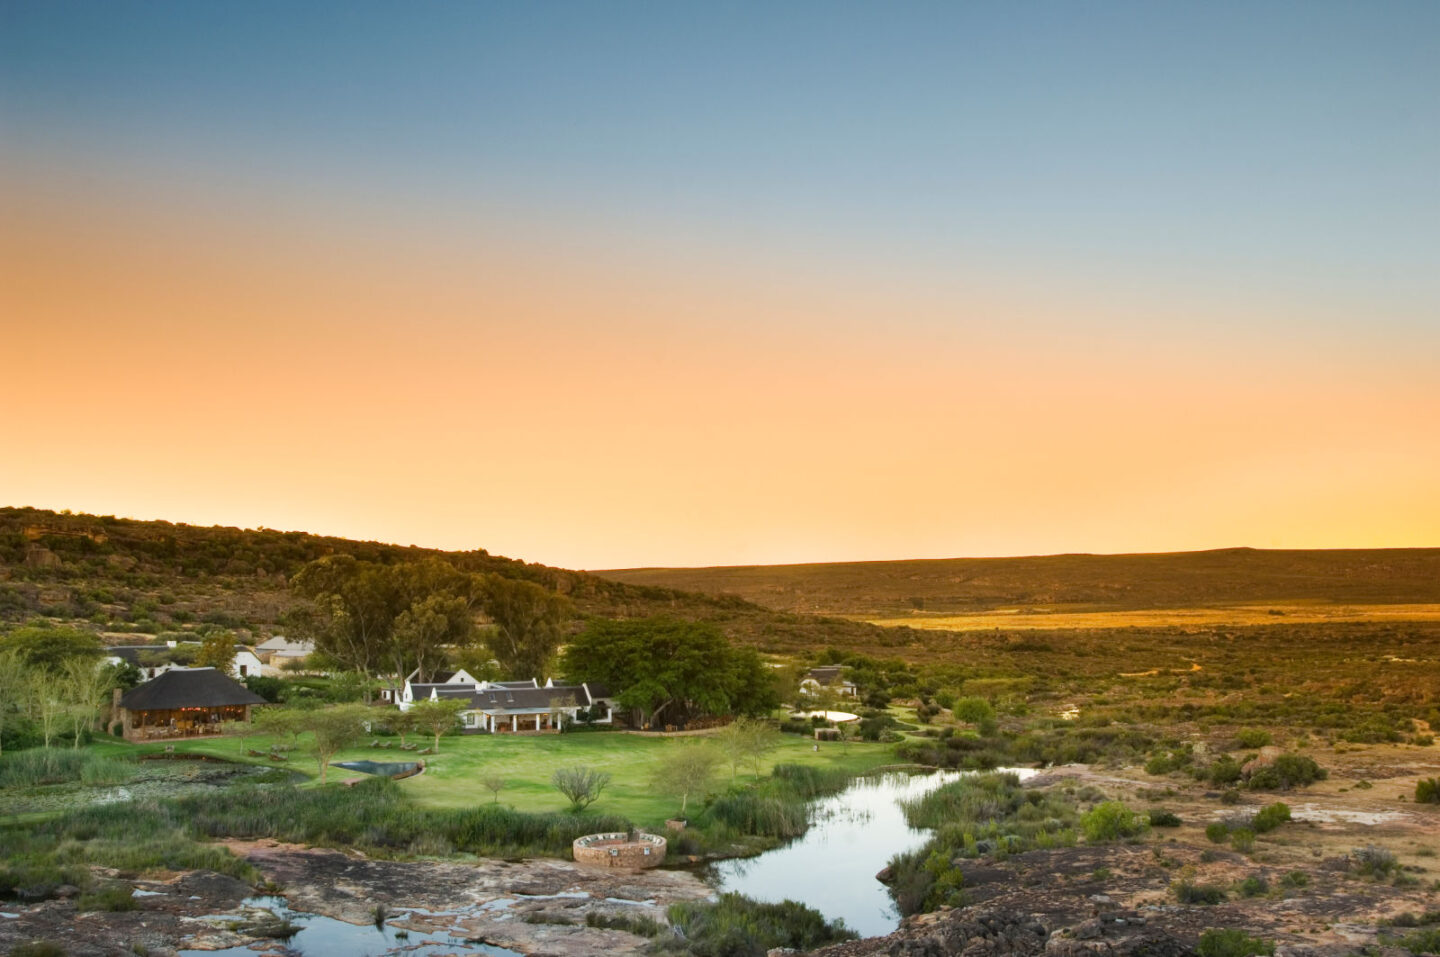 Bushmans Kloof Wilderness and Wellness Reserve, South Africa